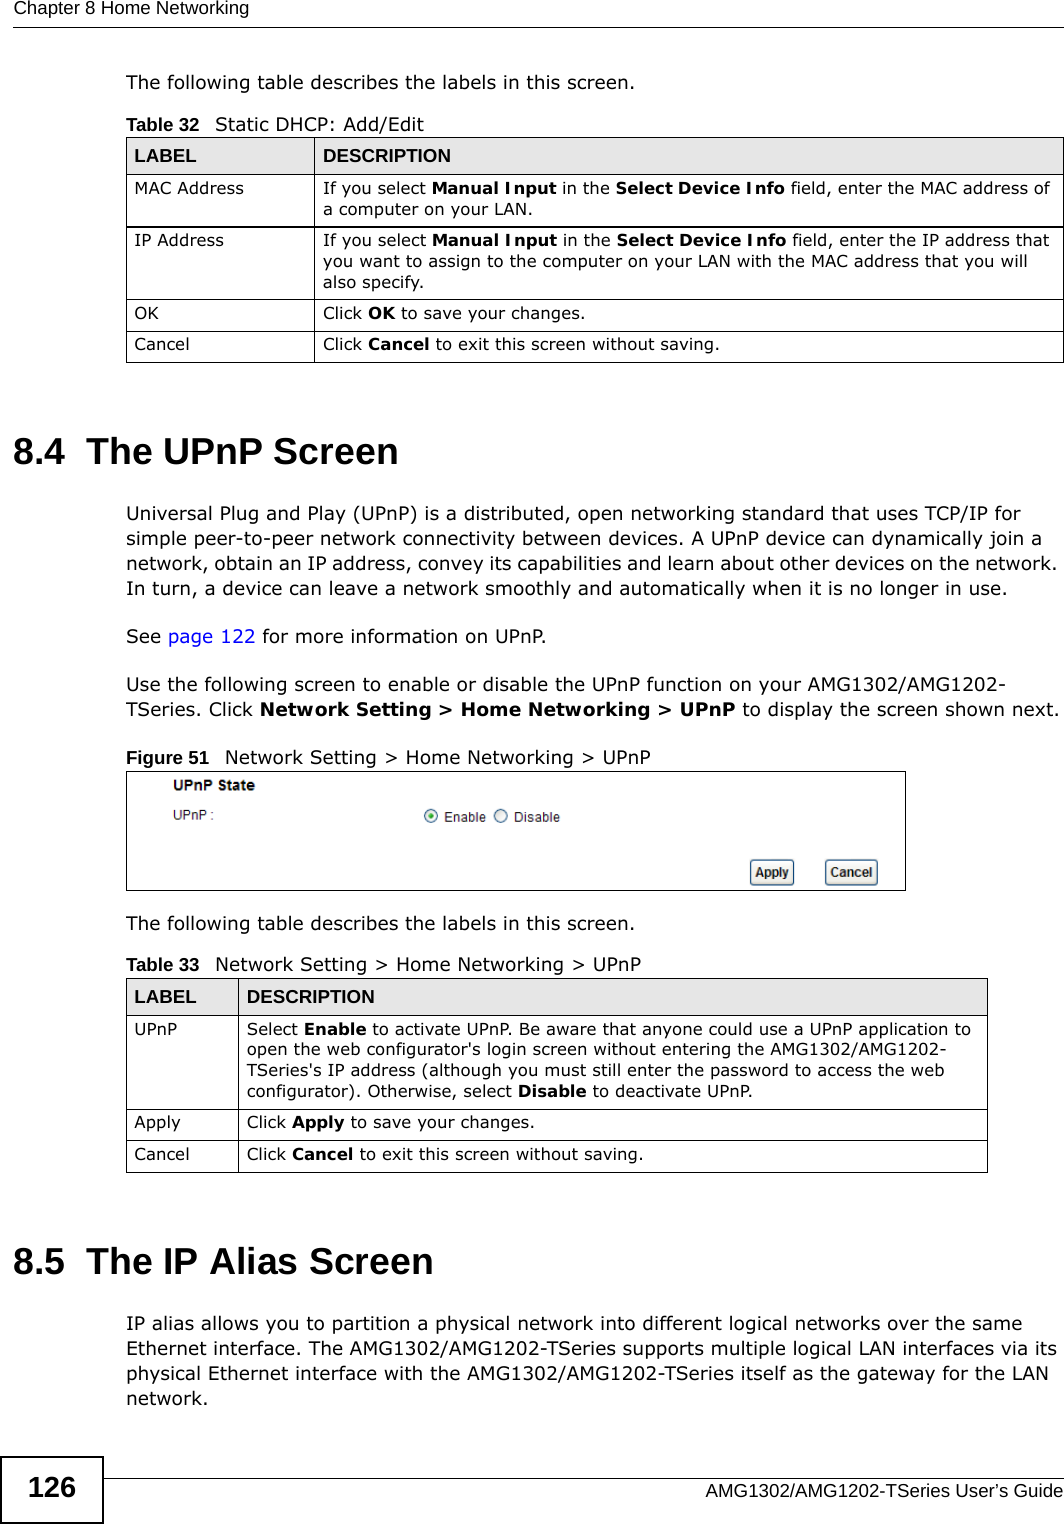 Chapter 8 Home NetworkingAMG1302/AMG1202-TSeries User’s Guide126The following table describes the labels in this screen.8.4  The UPnP ScreenUniversal Plug and Play (UPnP) is a distributed, open networking standard that uses TCP/IP for simple peer-to-peer network connectivity between devices. A UPnP device can dynamically join a network, obtain an IP address, convey its capabilities and learn about other devices on the network. In turn, a device can leave a network smoothly and automatically when it is no longer in use.See page 122 for more information on UPnP.Use the following screen to enable or disable the UPnP function on your AMG1302/AMG1202-TSeries. Click Network Setting &gt; Home Networking &gt; UPnP to display the screen shown next.Figure 51   Network Setting &gt; Home Networking &gt; UPnPThe following table describes the labels in this screen.8.5  The IP Alias ScreenIP alias allows you to partition a physical network into different logical networks over the same Ethernet interface. The AMG1302/AMG1202-TSeries supports multiple logical LAN interfaces via its physical Ethernet interface with the AMG1302/AMG1202-TSeries itself as the gateway for the LAN network.Table 32   Static DHCP: Add/EditLABEL DESCRIPTIONMAC Address If you select Manual Input in the Select Device Info field, enter the MAC address of a computer on your LAN.IP Address If you select Manual Input in the Select Device Info field, enter the IP address that you want to assign to the computer on your LAN with the MAC address that you will also specify.OK Click OK to save your changes.Cancel Click Cancel to exit this screen without saving.Table 33   Network Setting &gt; Home Networking &gt; UPnPLABEL DESCRIPTIONUPnP Select Enable to activate UPnP. Be aware that anyone could use a UPnP application to open the web configurator&apos;s login screen without entering the AMG1302/AMG1202-TSeries&apos;s IP address (although you must still enter the password to access the web configurator). Otherwise, select Disable to deactivate UPnP.Apply Click Apply to save your changes.Cancel Click Cancel to exit this screen without saving.